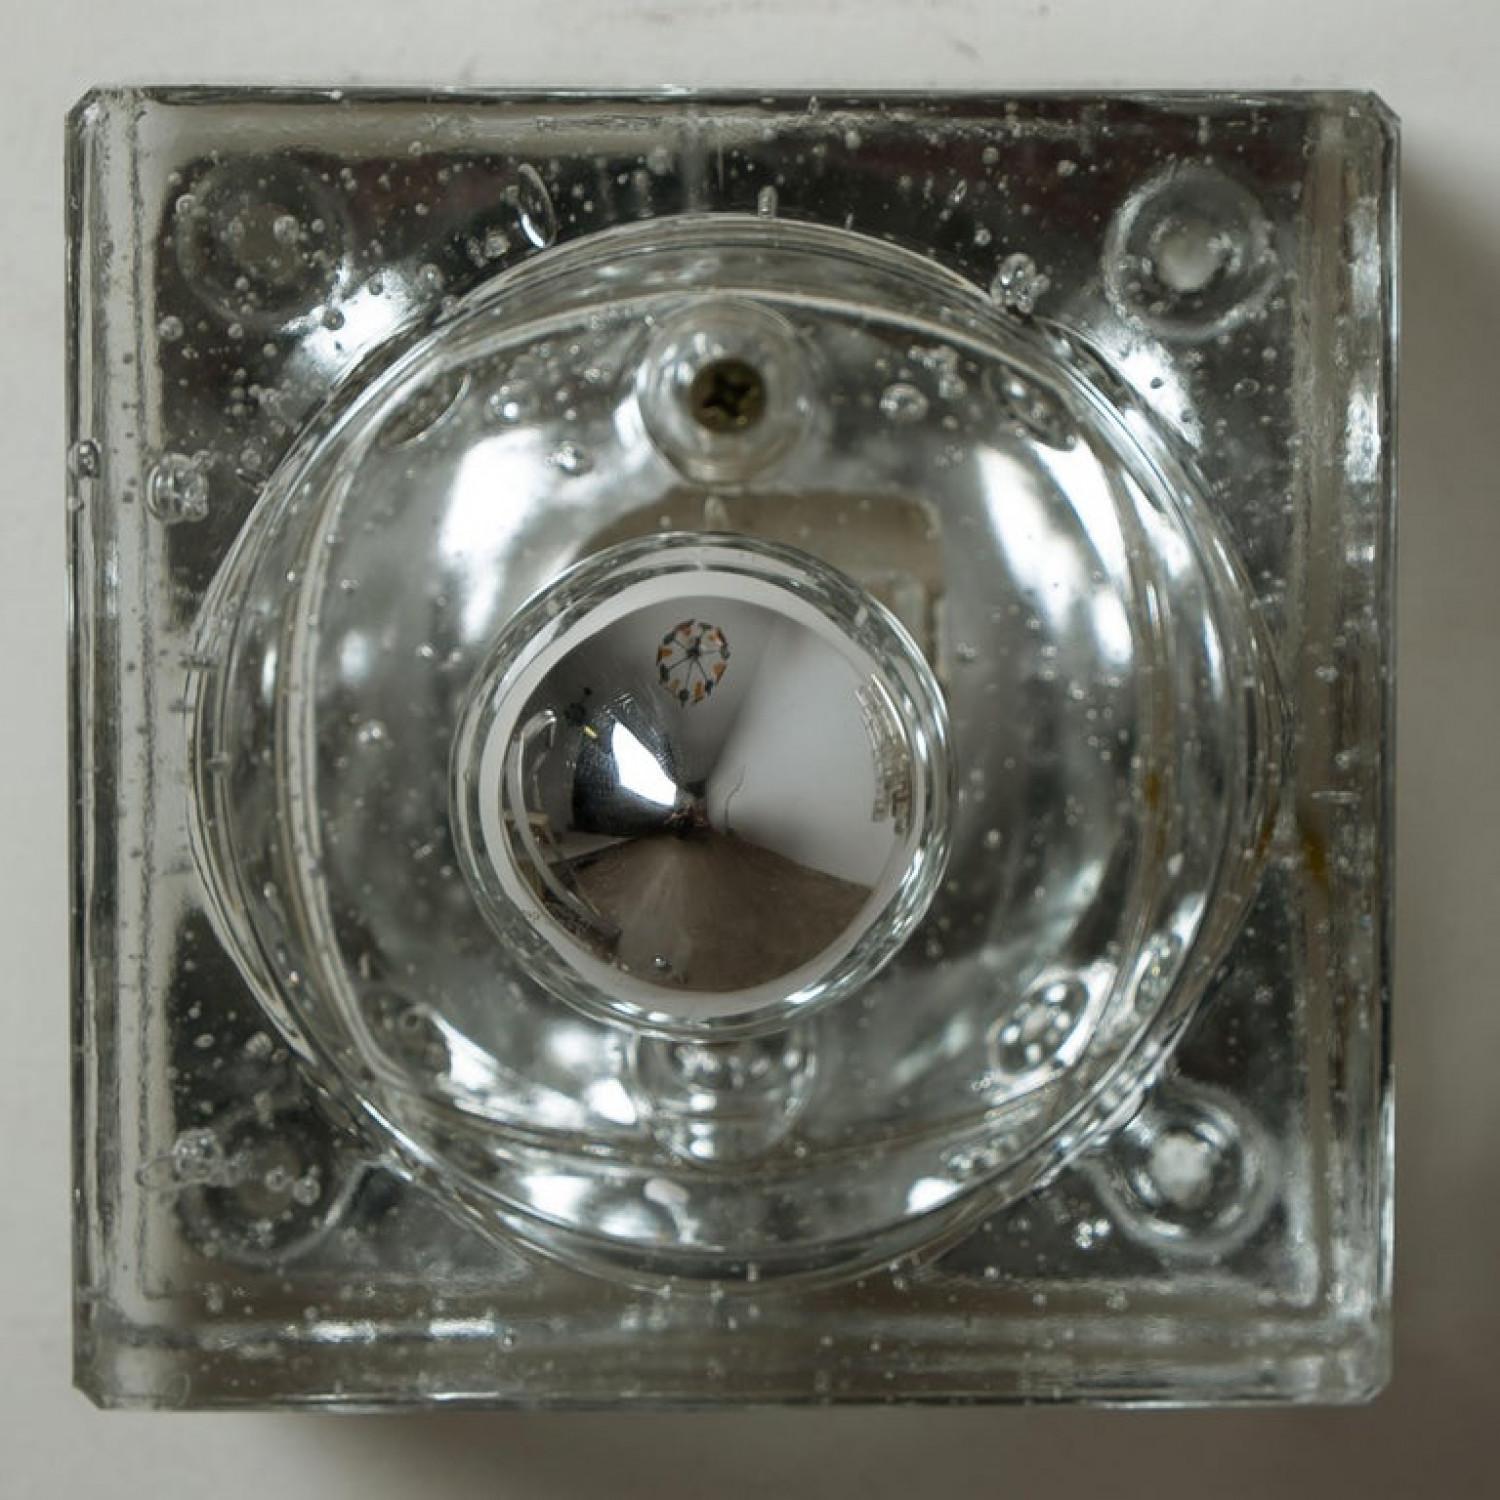 This lights are made from thick hand blown glass on a square, silver colored backplate. The glass causes a nice lighting effect on the ceiling or wall. Each lamp has one E14 fitting (Max 25 Watt).

Can work as impressive wall or ceiling